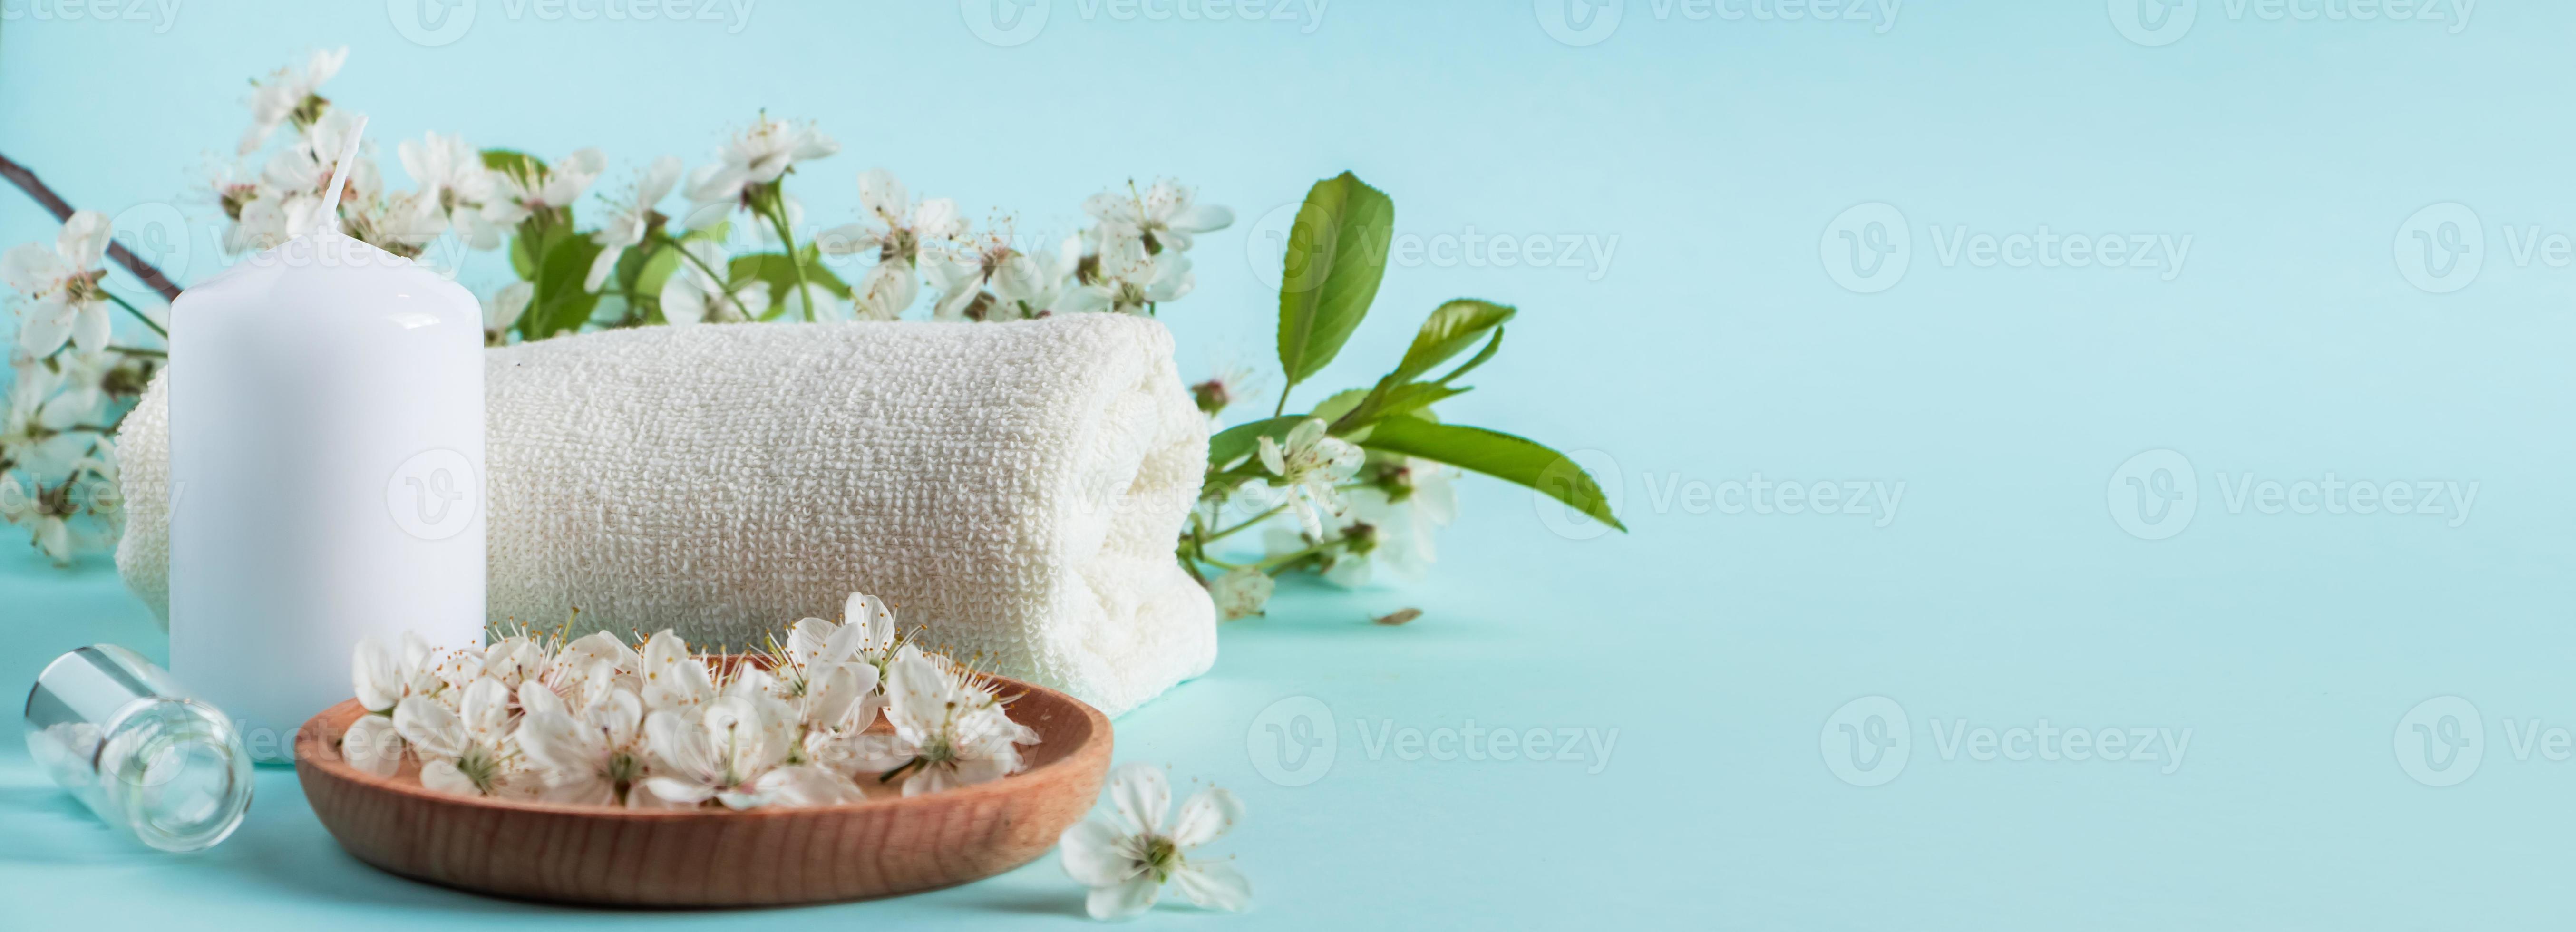 https://static.vecteezy.com/system/resources/previews/003/840/568/large_2x/aromatherapy-wellness-concept-spa-and-relaxation-accessories-on-blue-background-aromatic-oil-towel-candle-and-flowers-organic-skin-care-product-photo.jpg